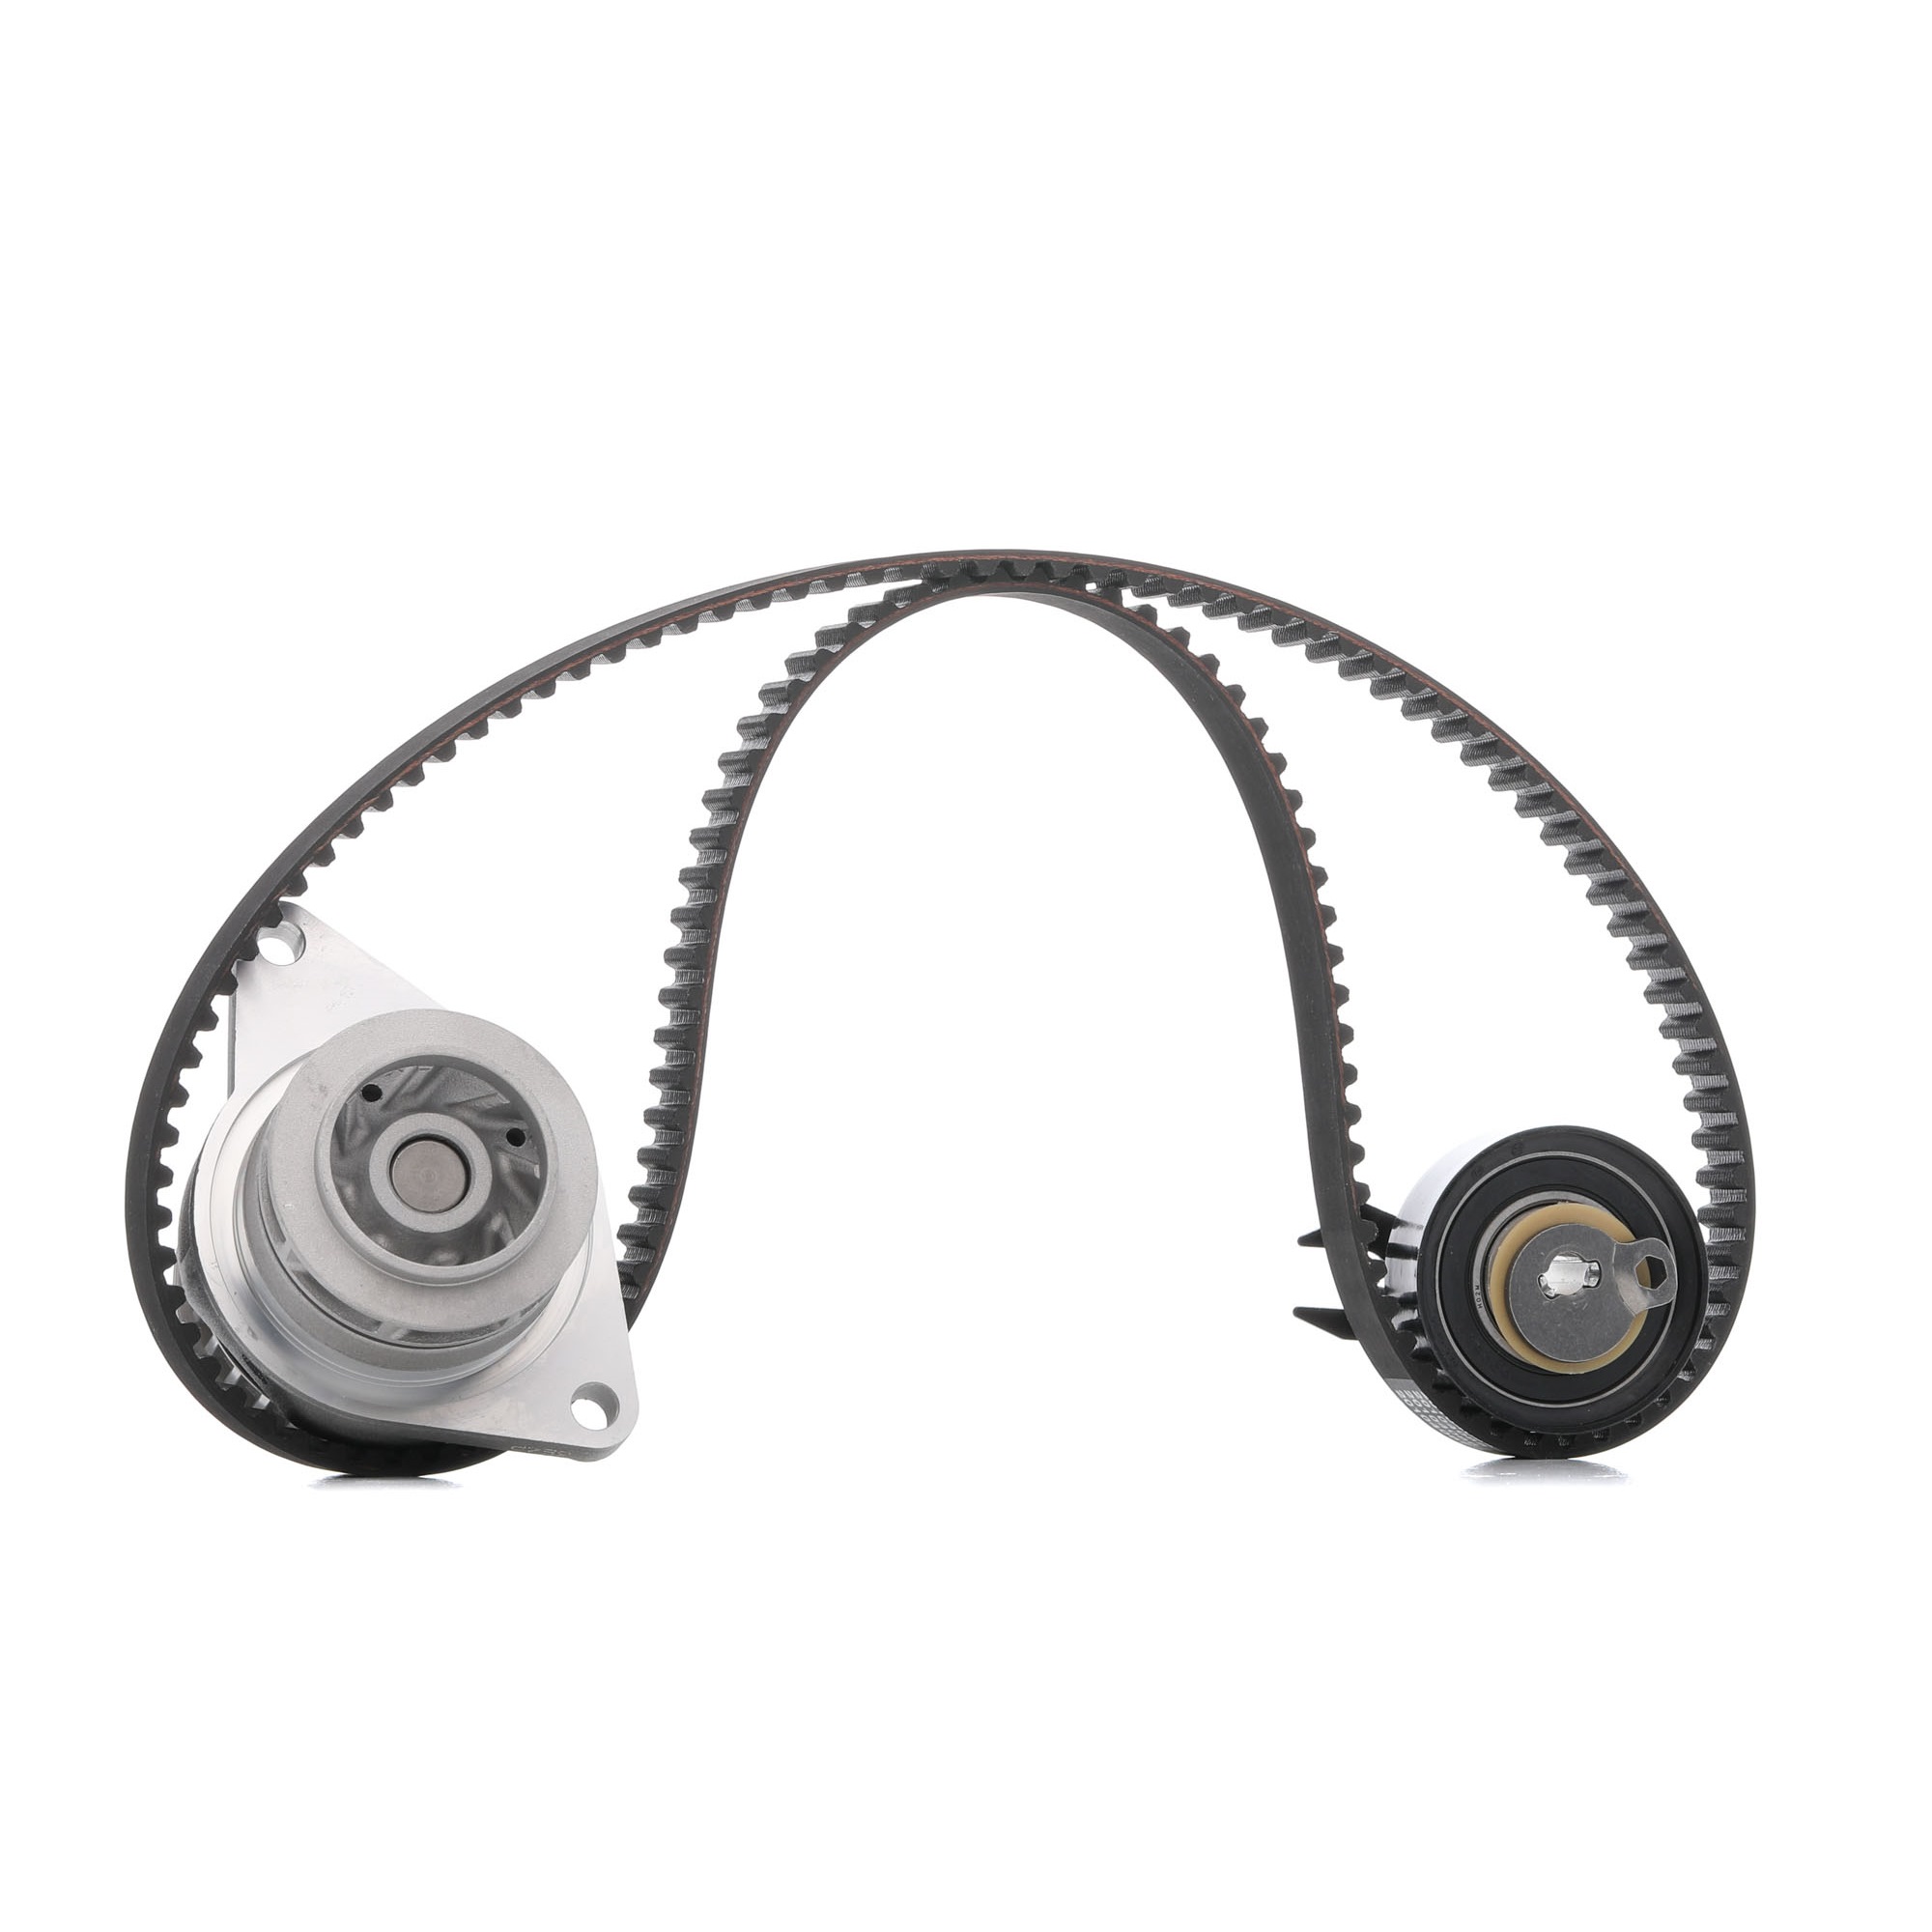 Timing belt replacement kit MAGNETI MARELLI Number of Teeth: 135 L: 1080 mm, Width: 19 mm - 132011160024